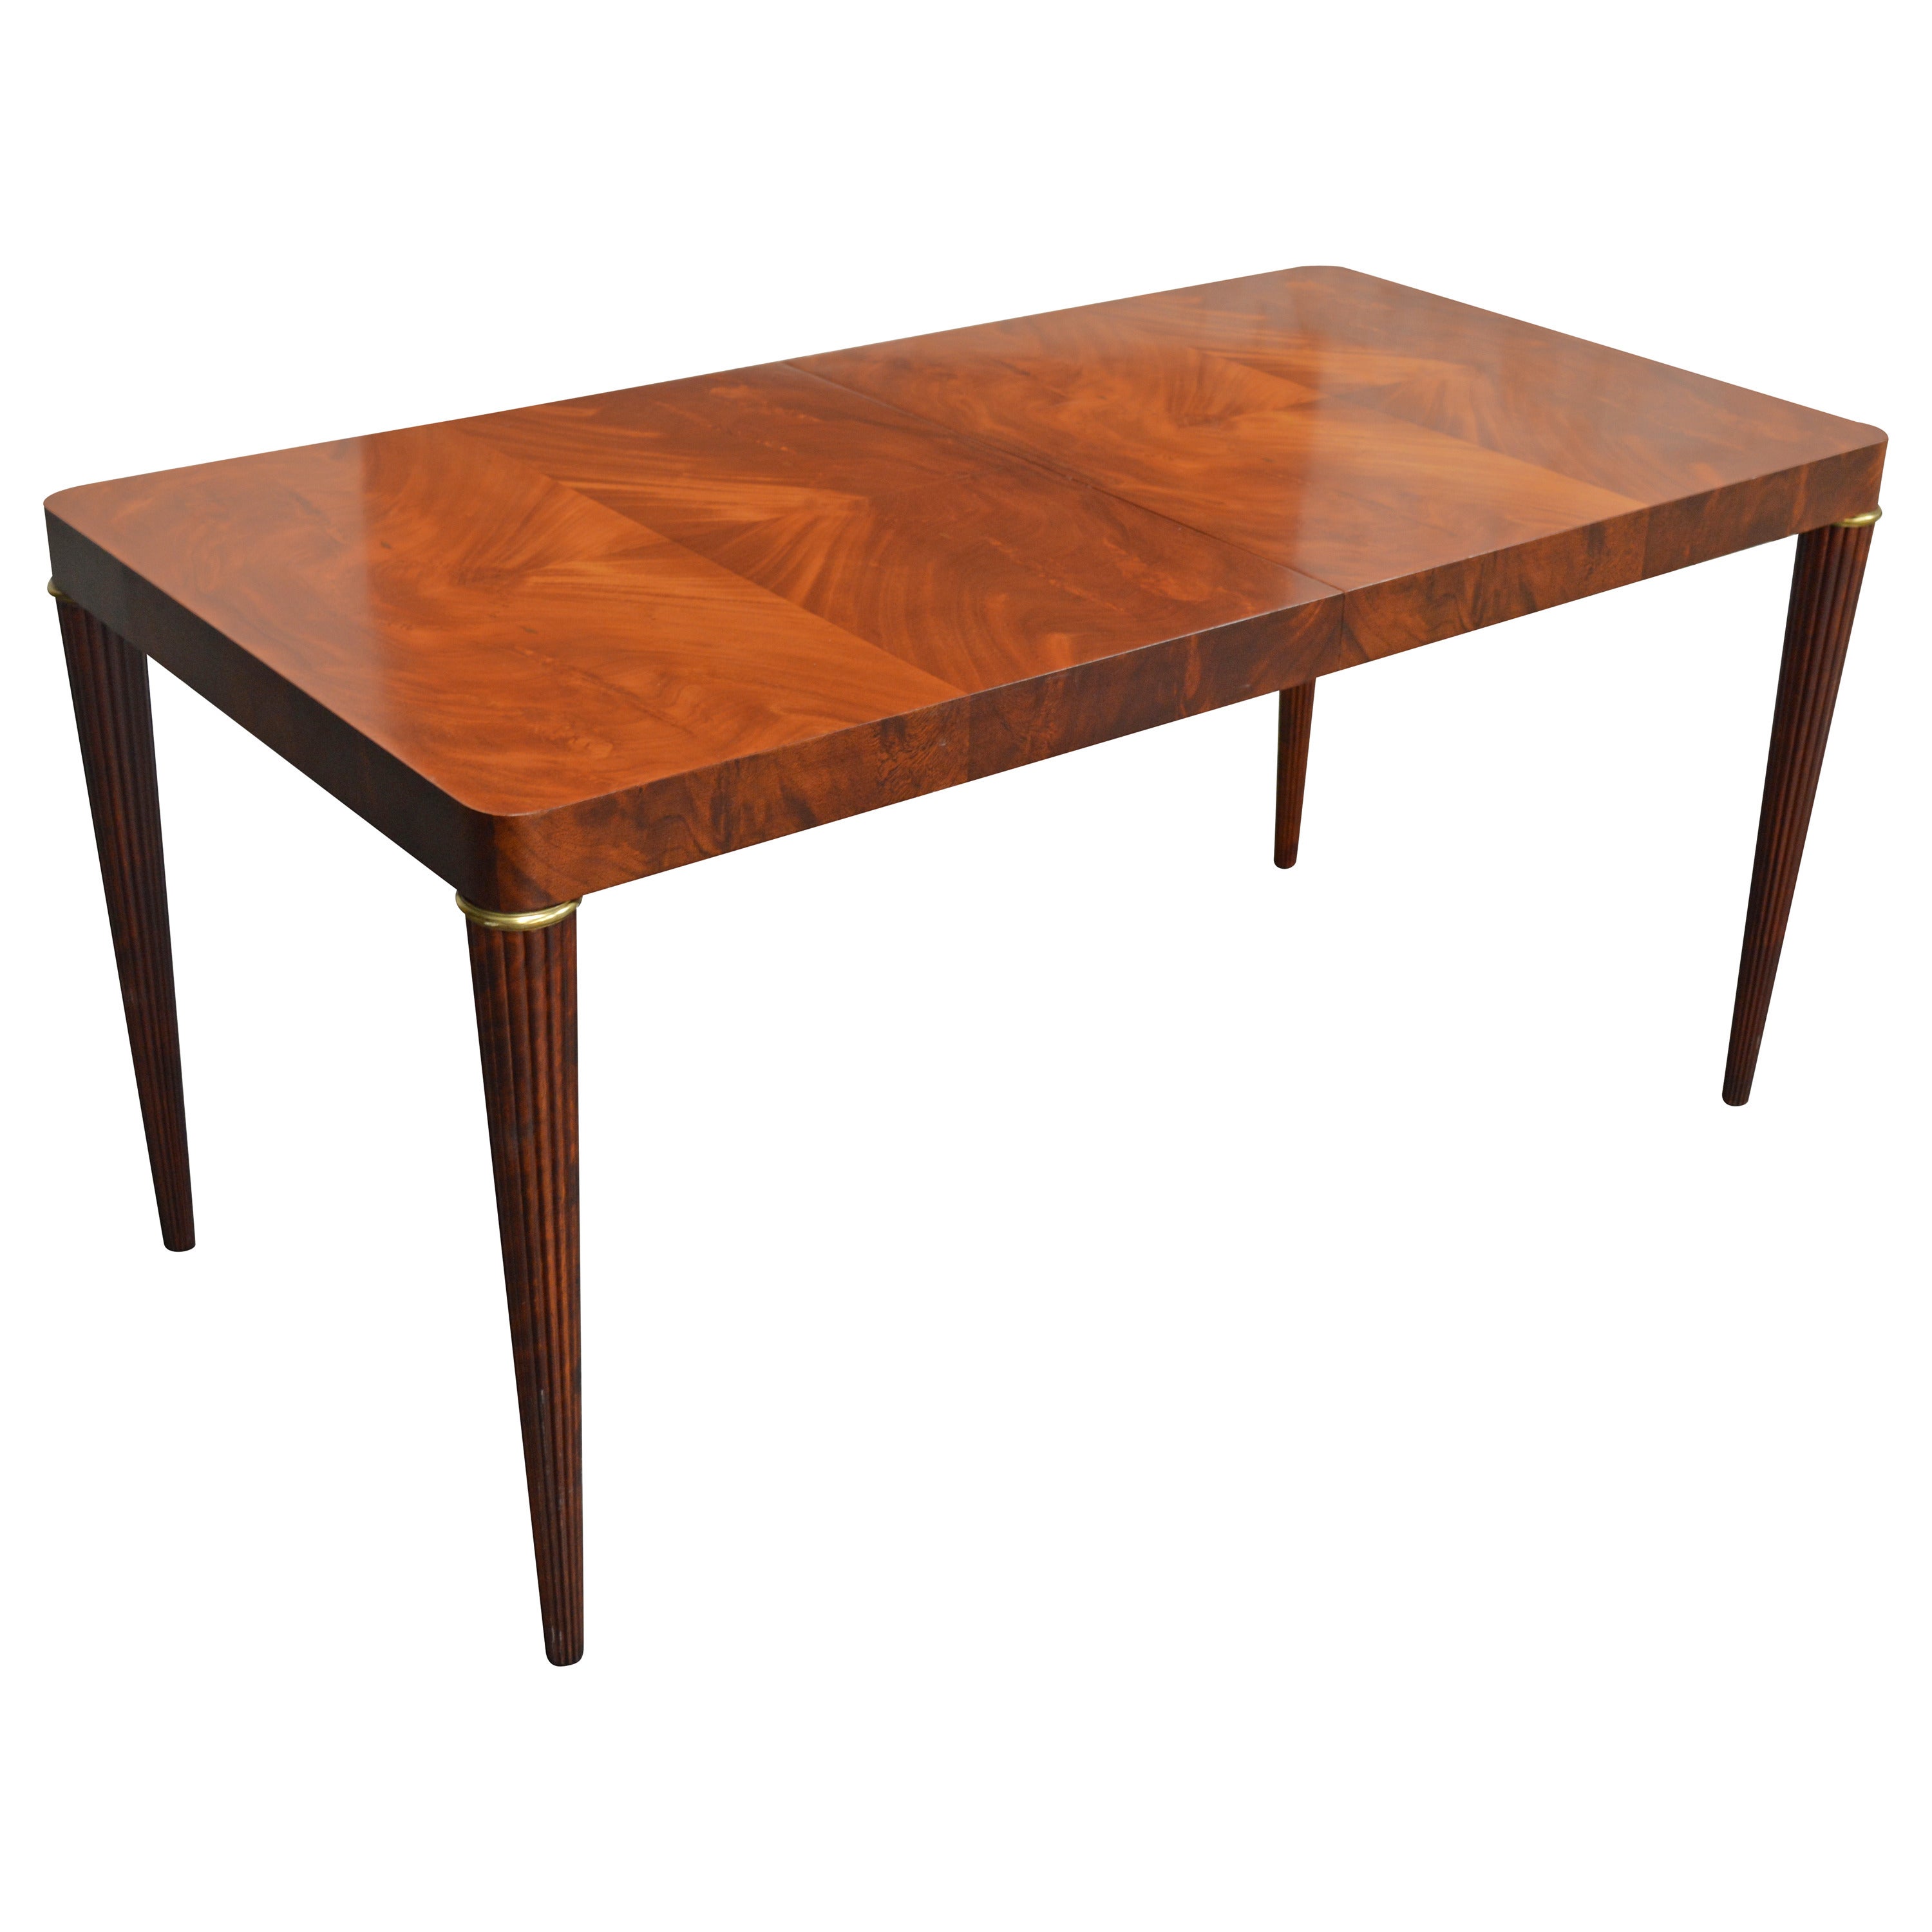 Stunning Swedish Bookmatched Mahogany Dining or Writing Table